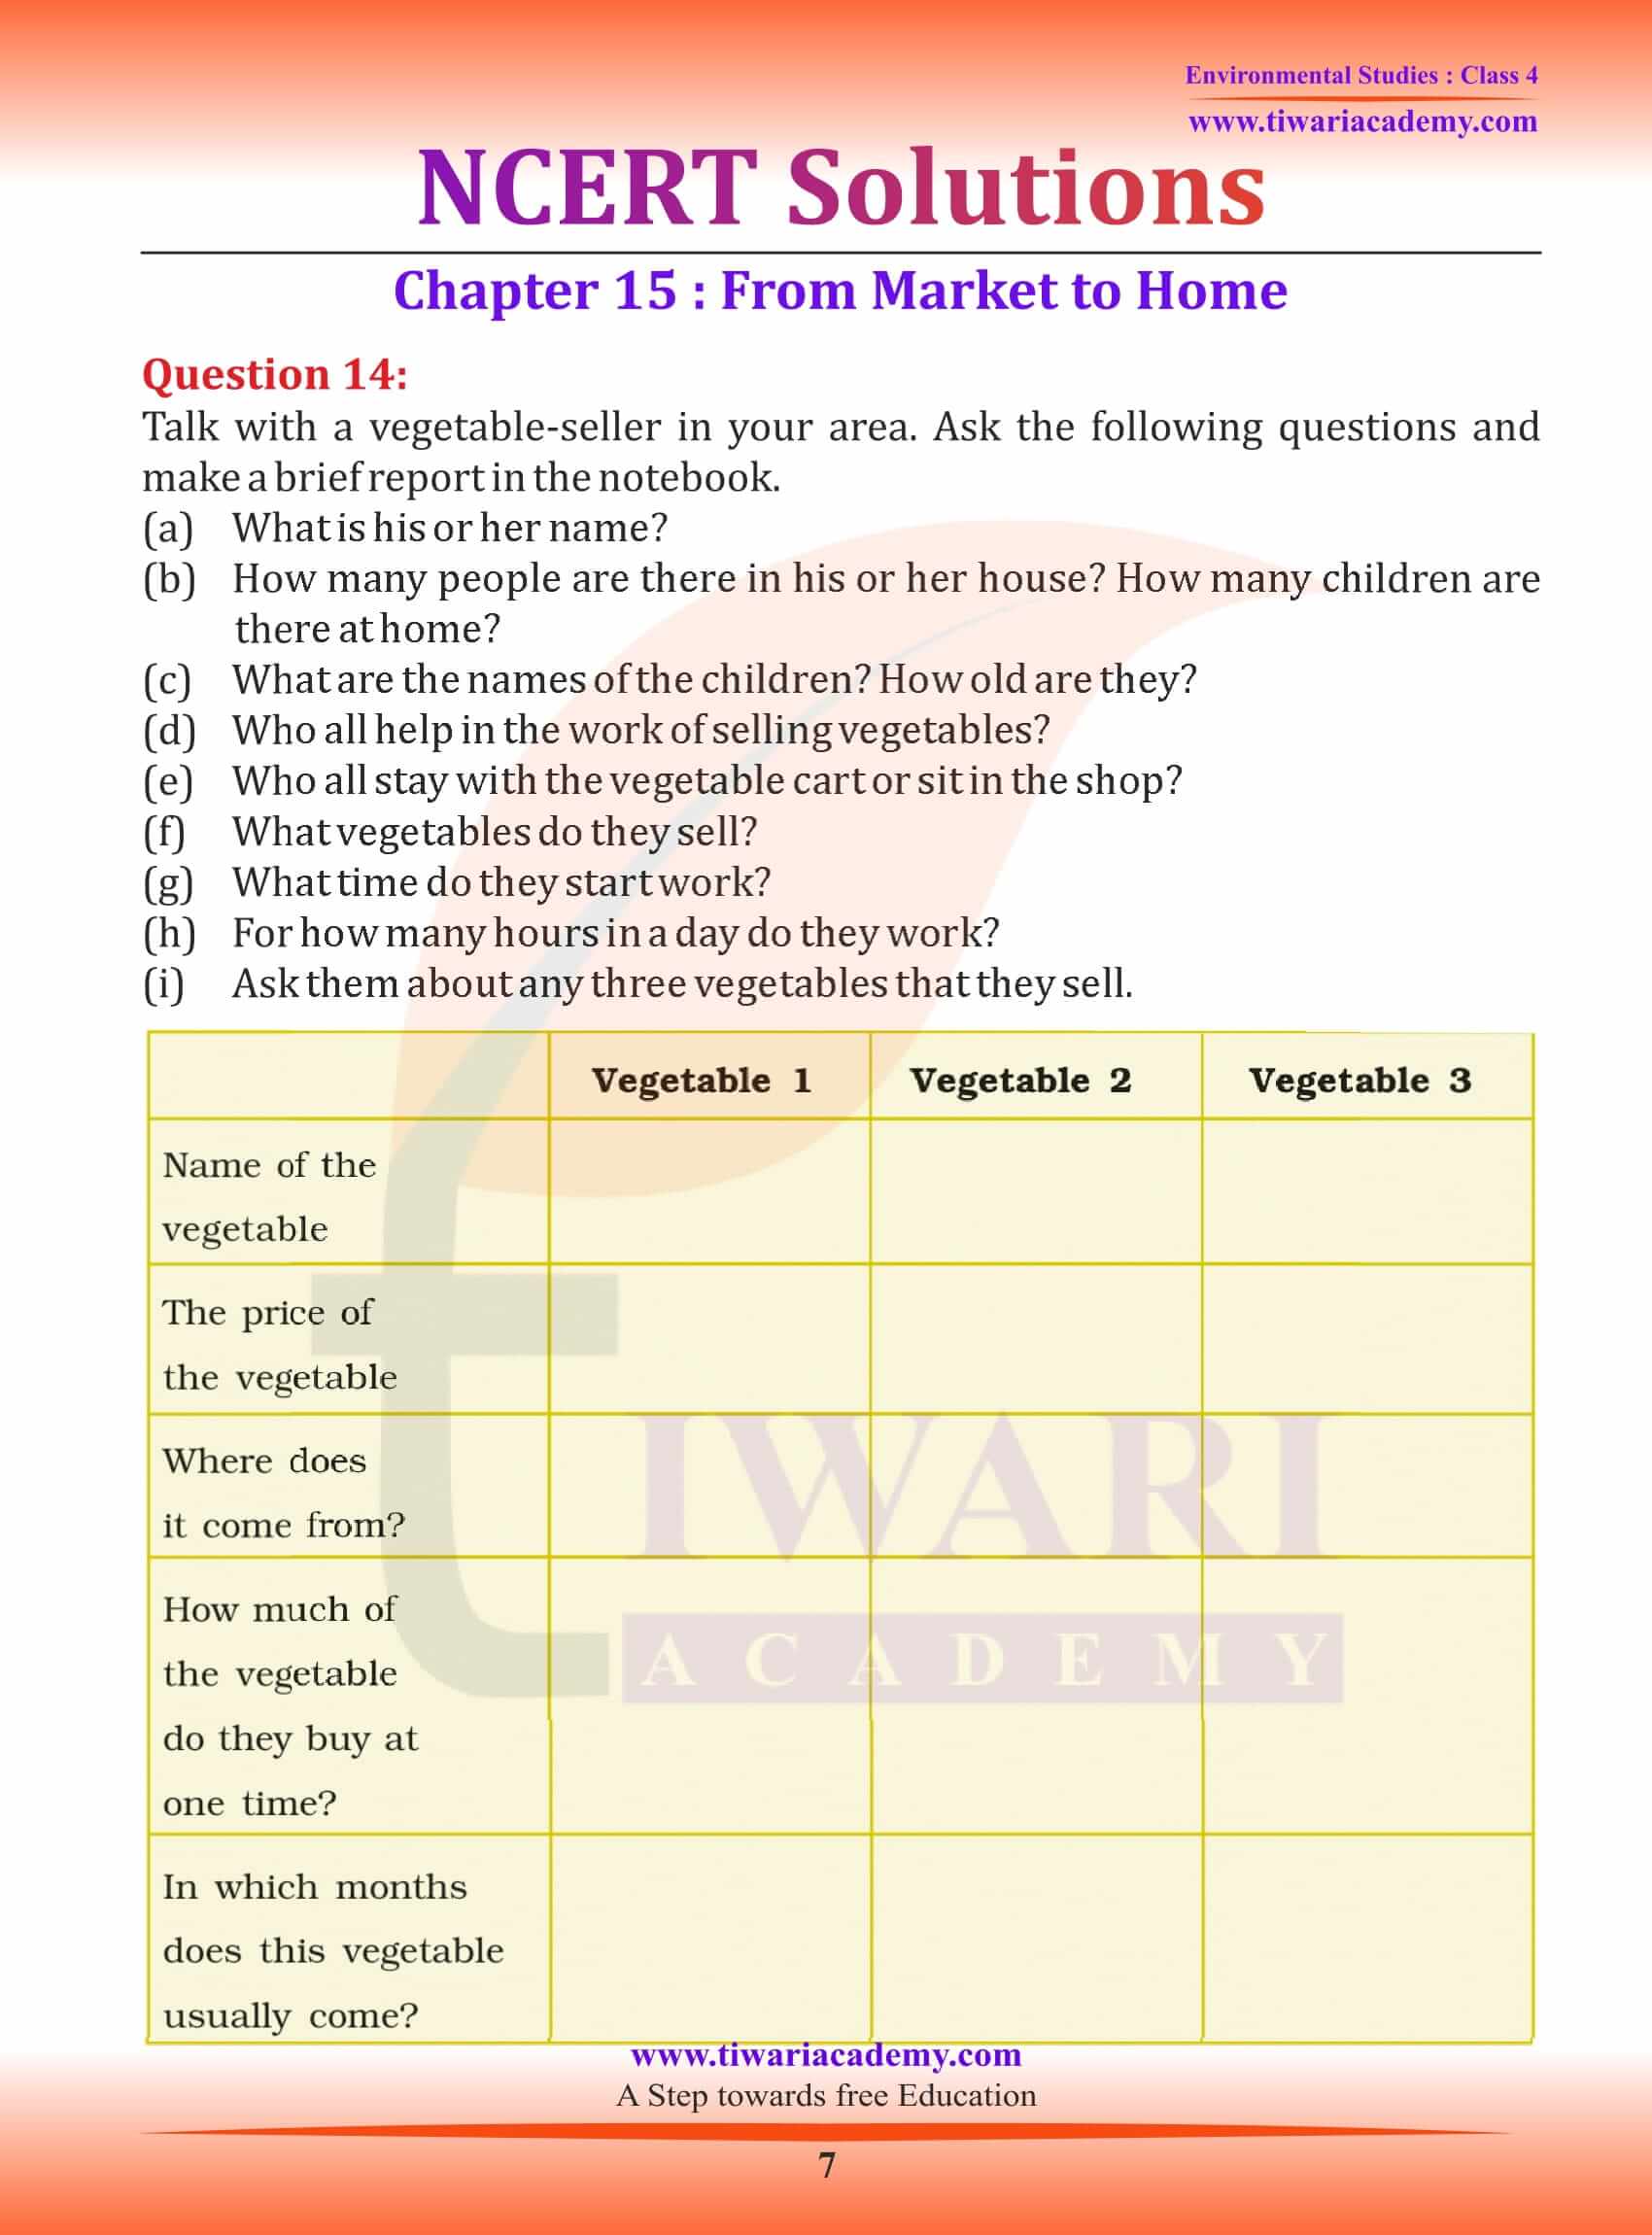 NCERT Solutions for Class 4 EVS Chapter 15 Question Answers